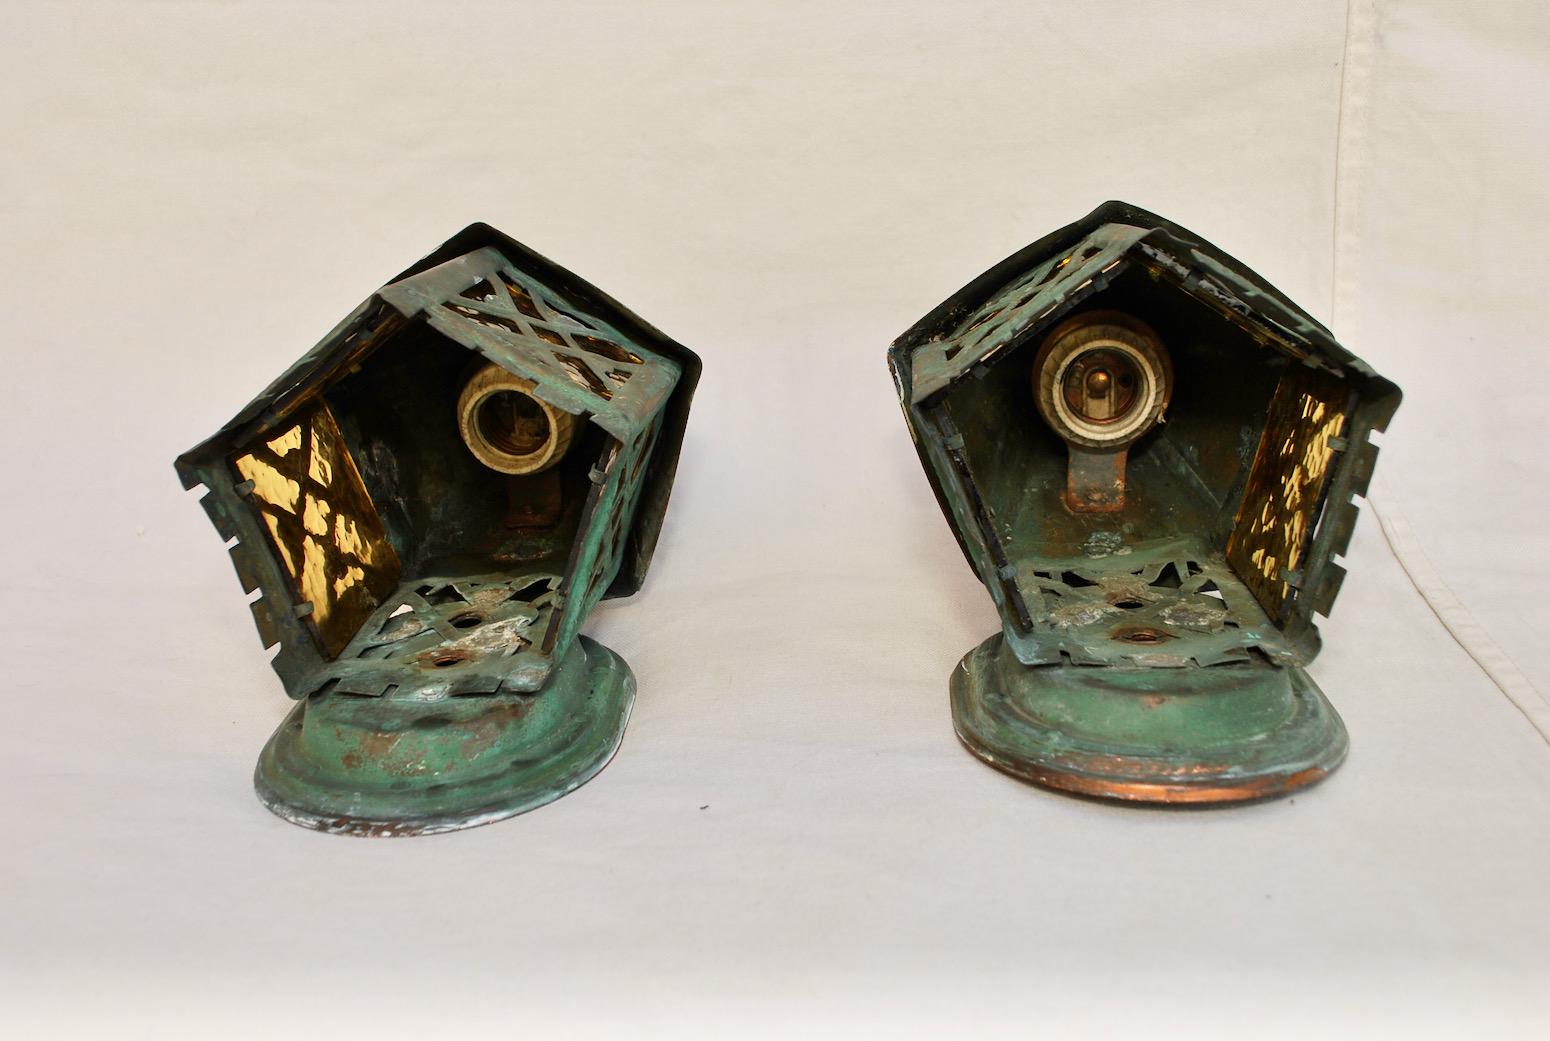 A very nice and cute 1920's outdoor copper sconces.